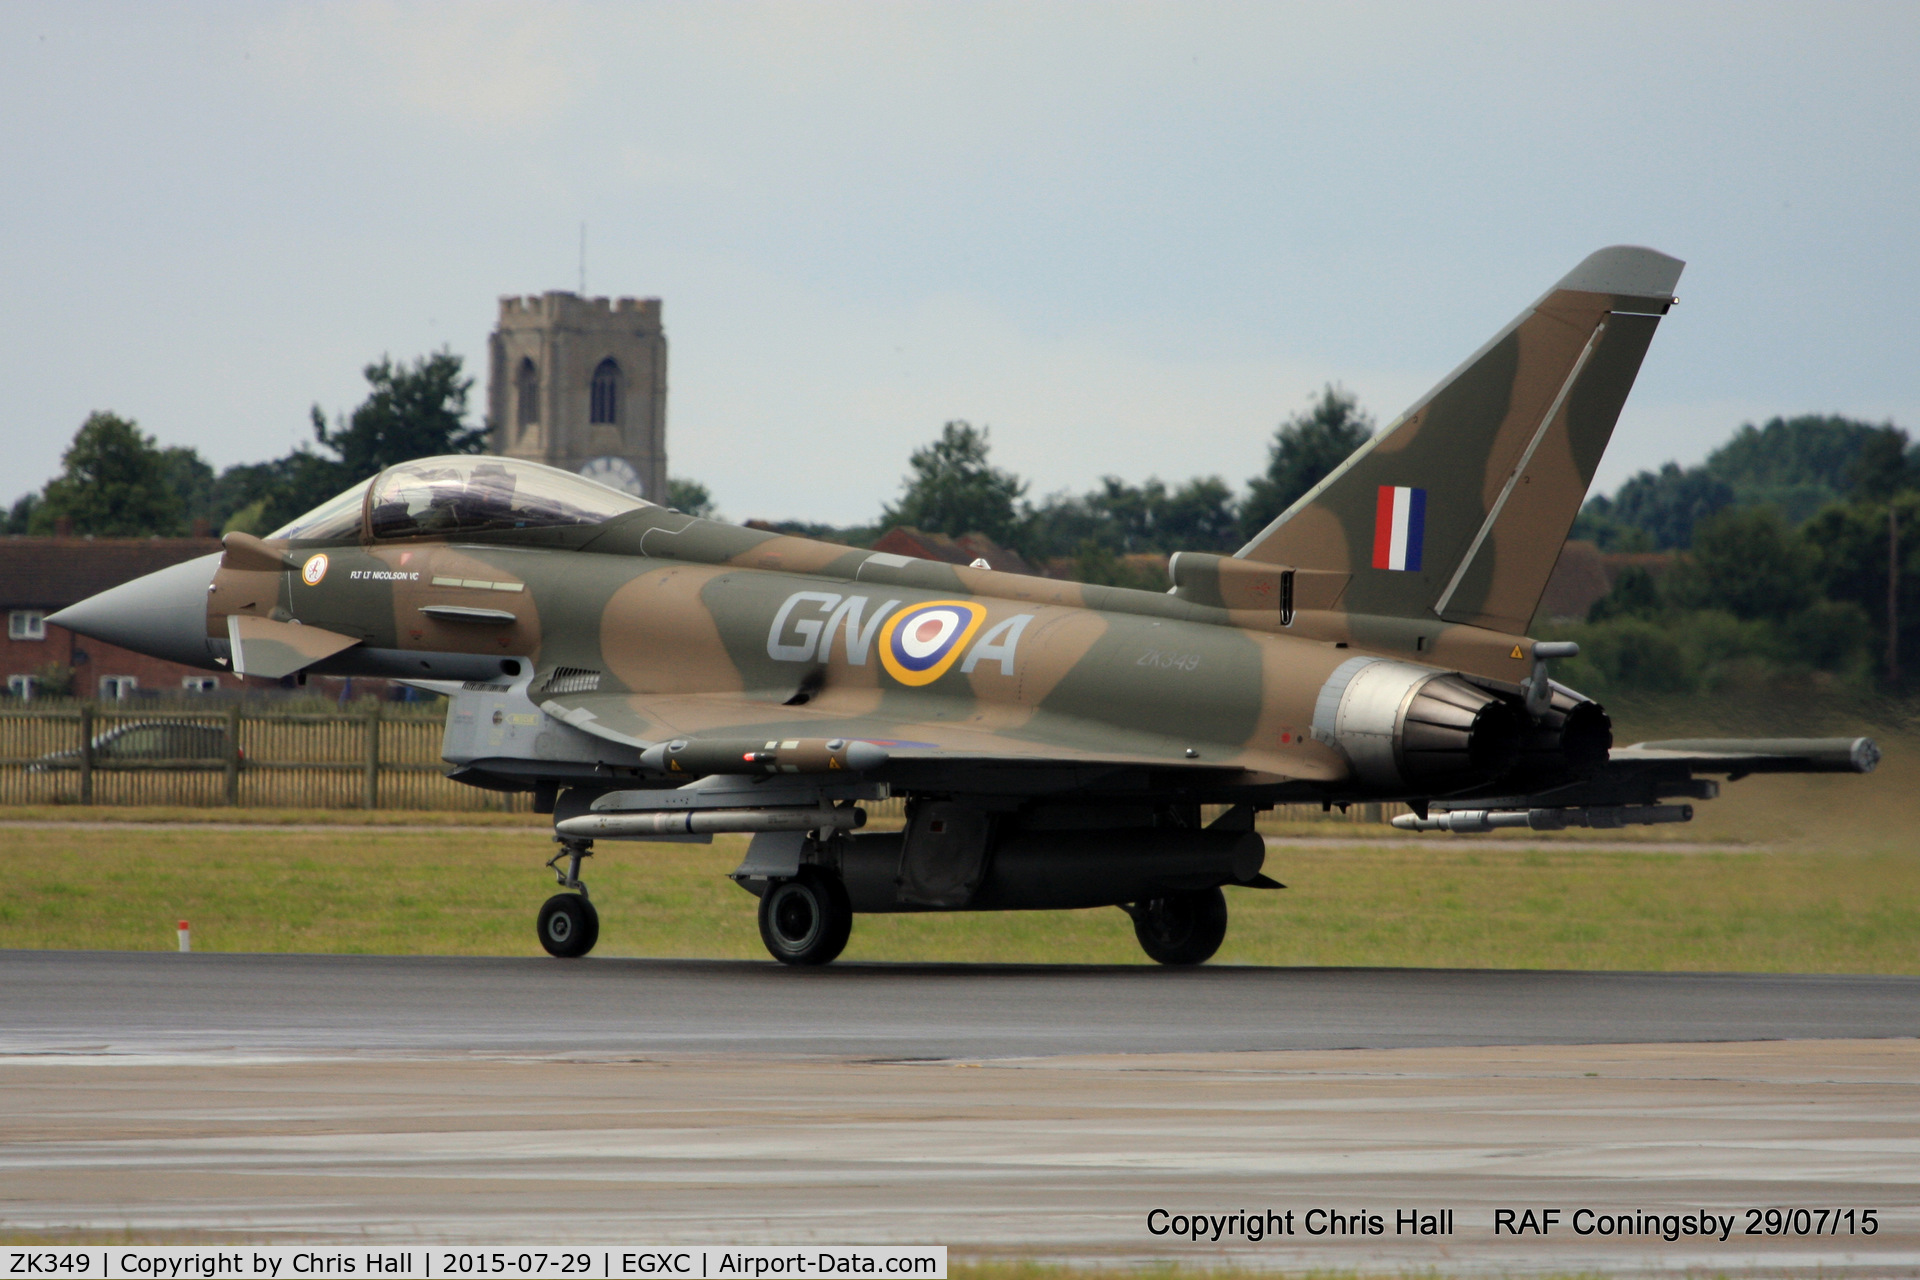 ZK349, Eurofighter EF-2000 Typhoon FGR.4 C/N BS110/399, Battle of Britain 75th Anniversary “Hawker Hurricane” Livery